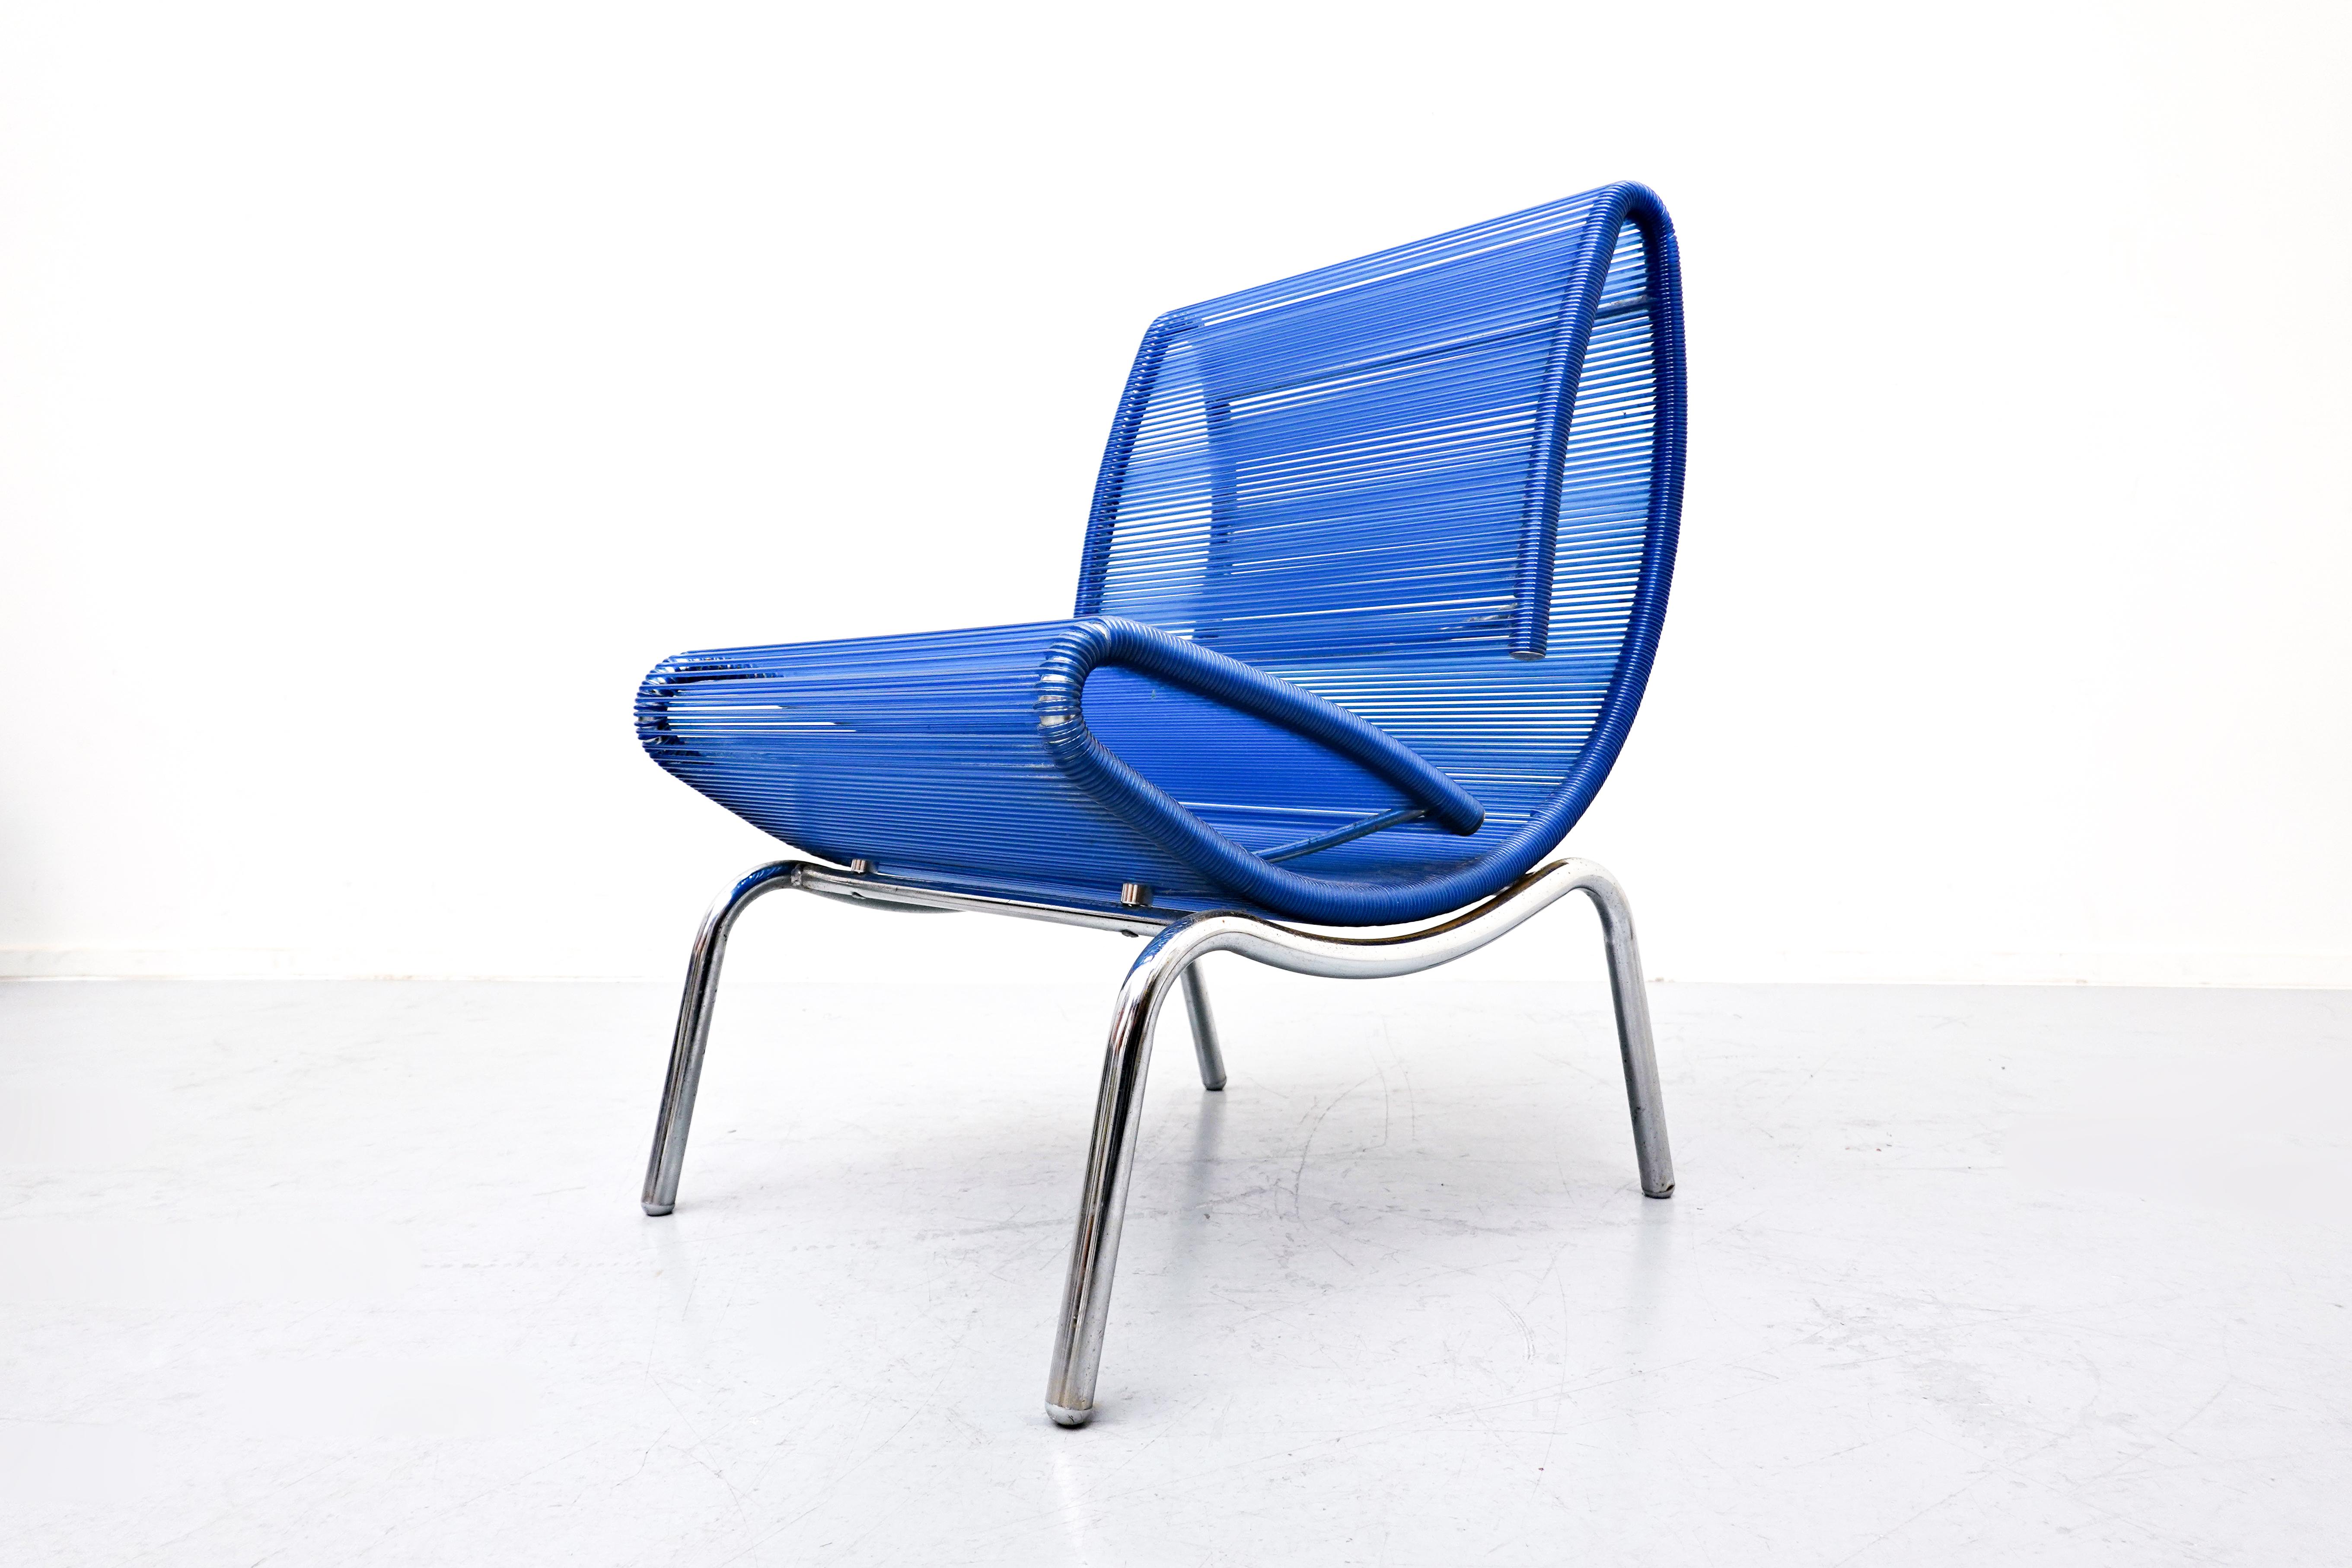 Blue plastic rope chair by Roberto Semprini - Italy.